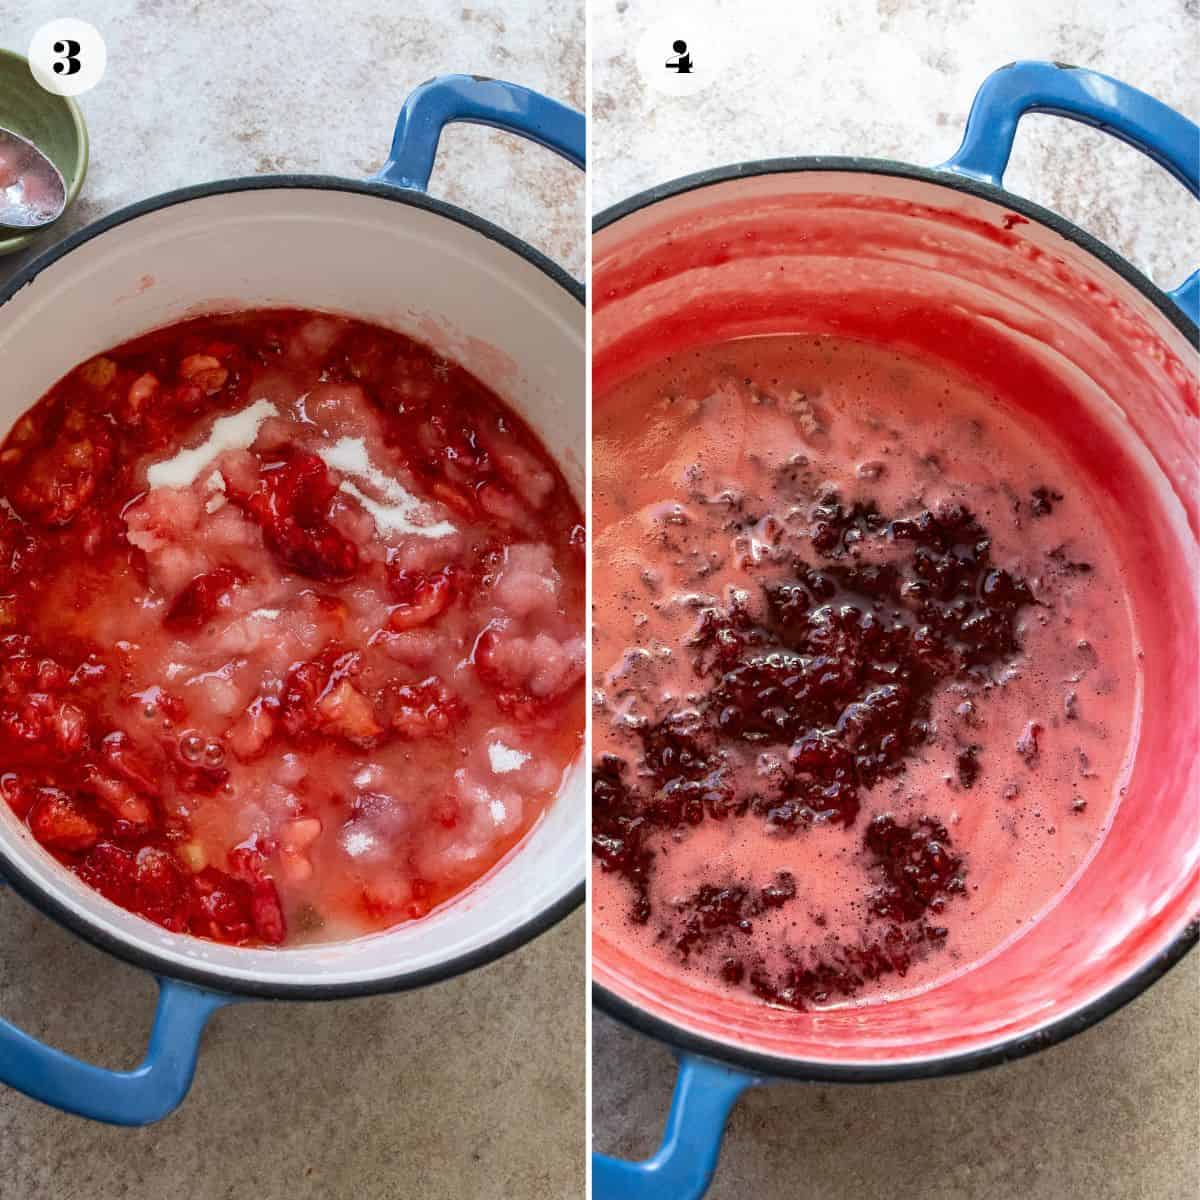 A collage of two images showing strawberry jam after boiling.